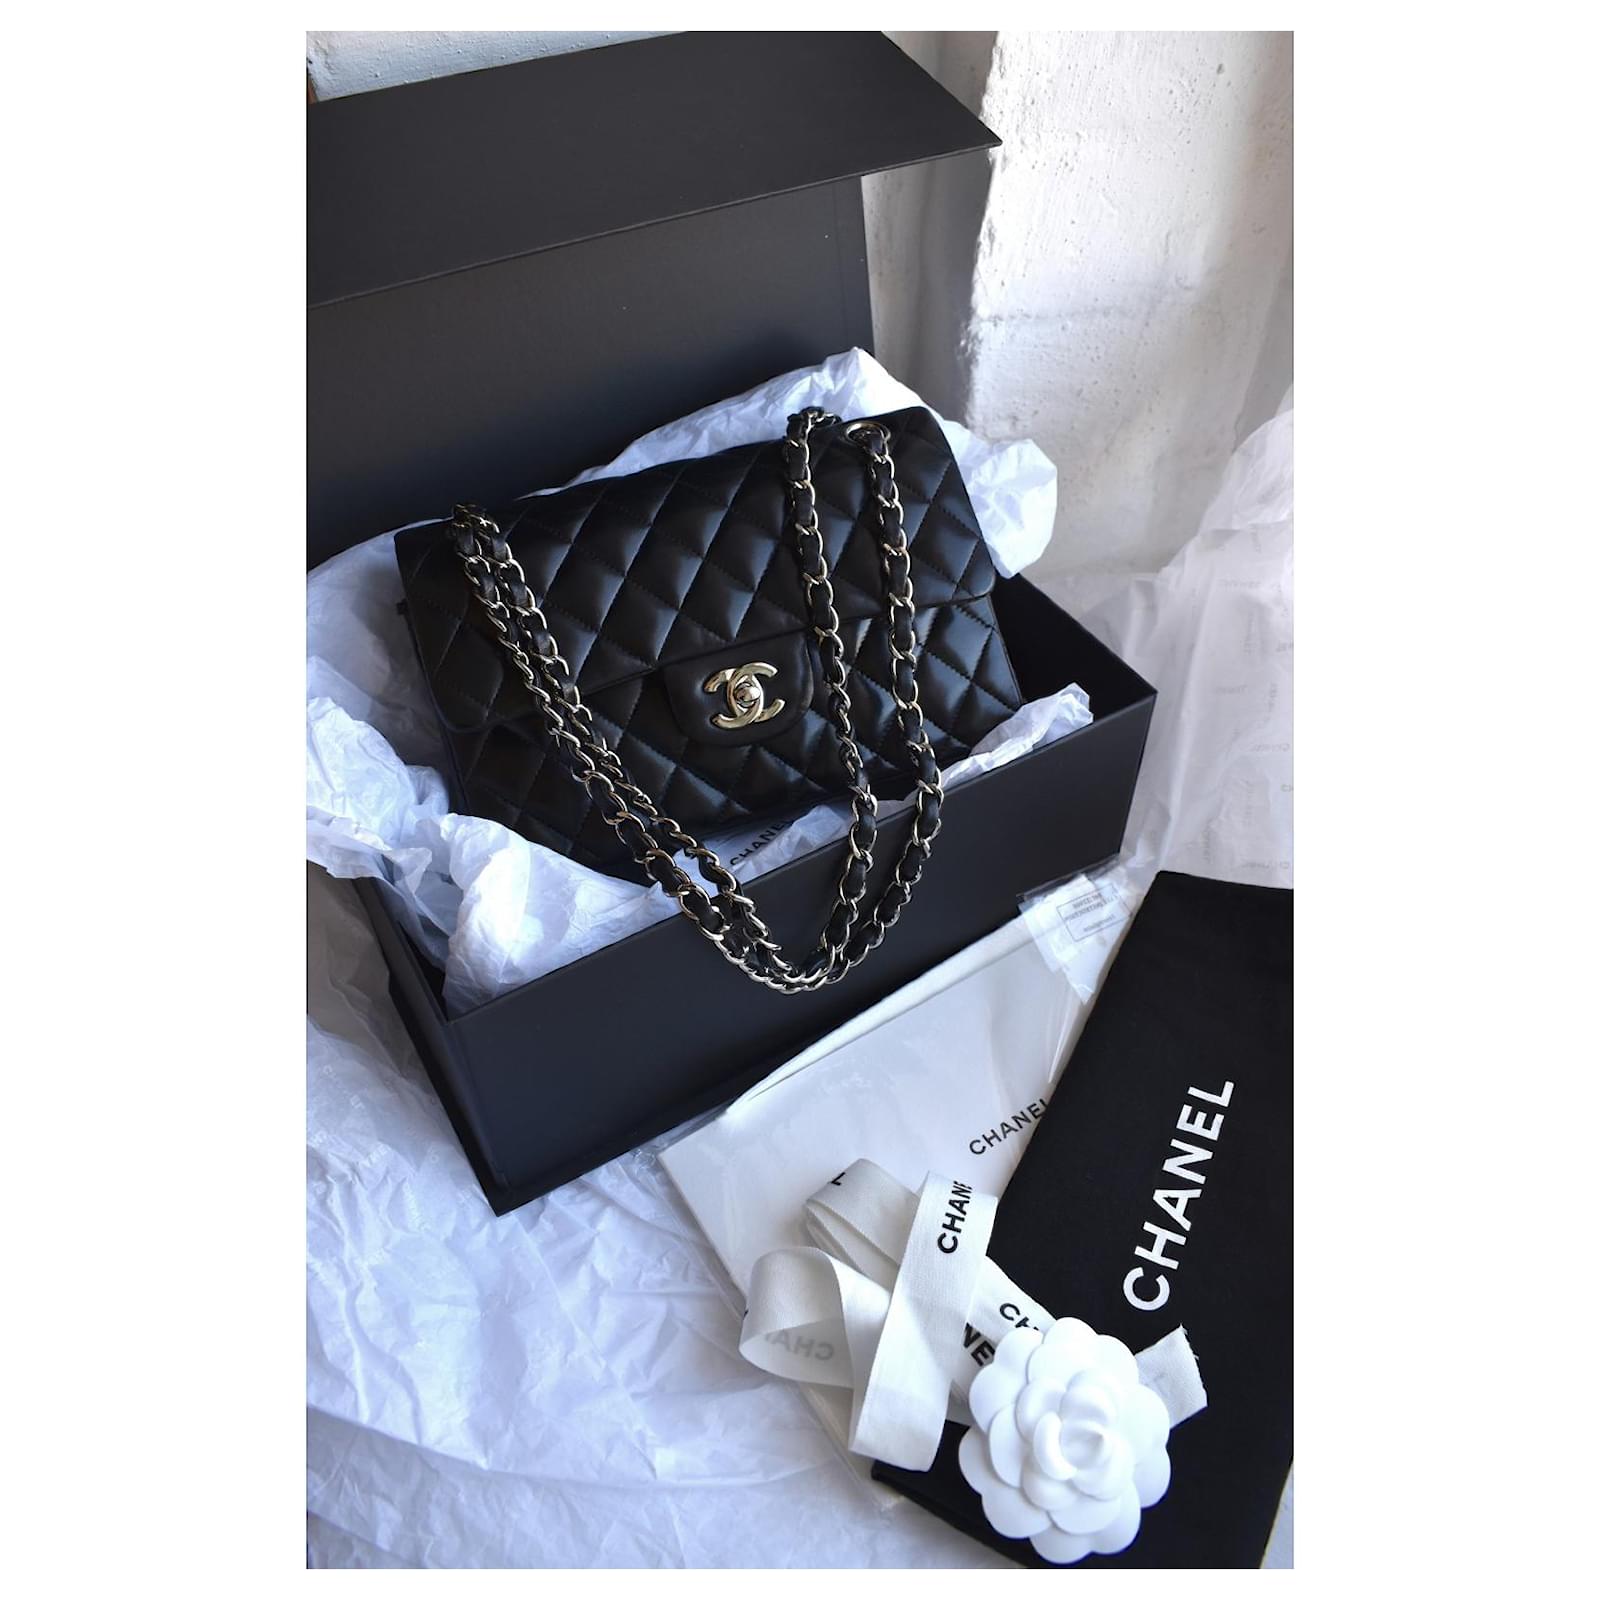 Chanel box and gift wrap  Chanel box, Chanel classic flap bag